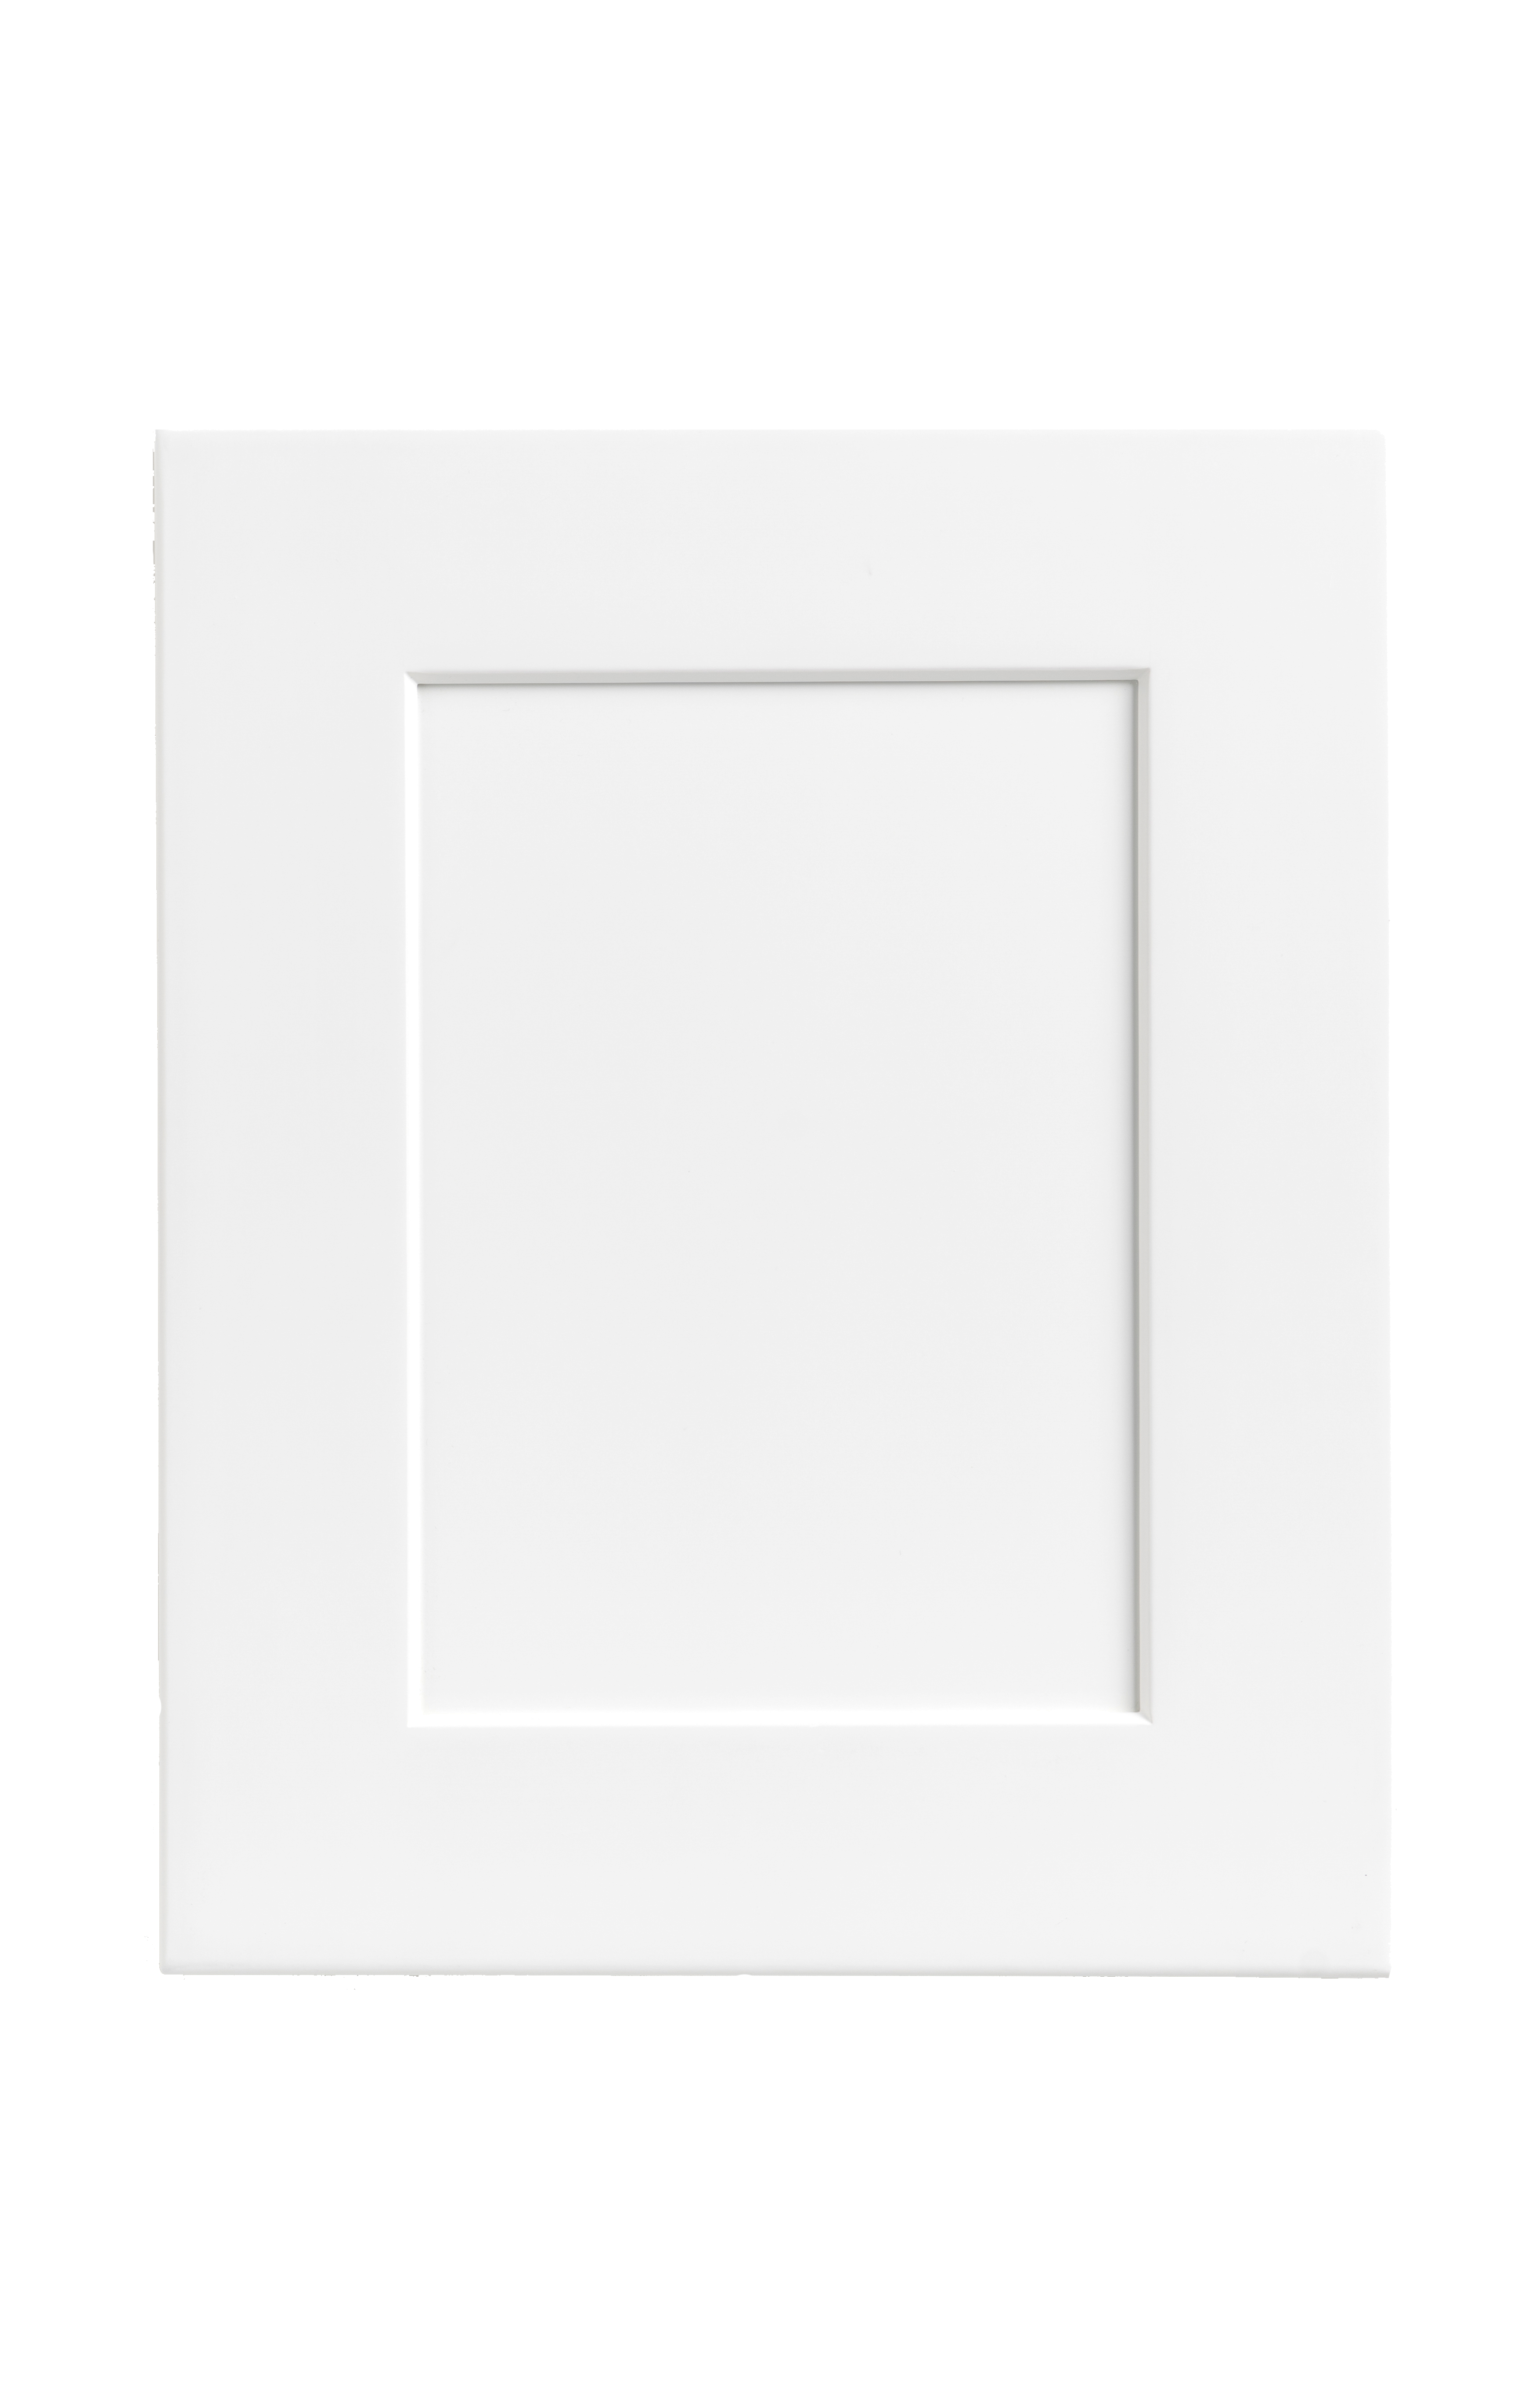 36" Tall White Shaker 1/2" Overlay Wall Cabinet - Double Door 24", 27", 30", 33" & 36" Wide